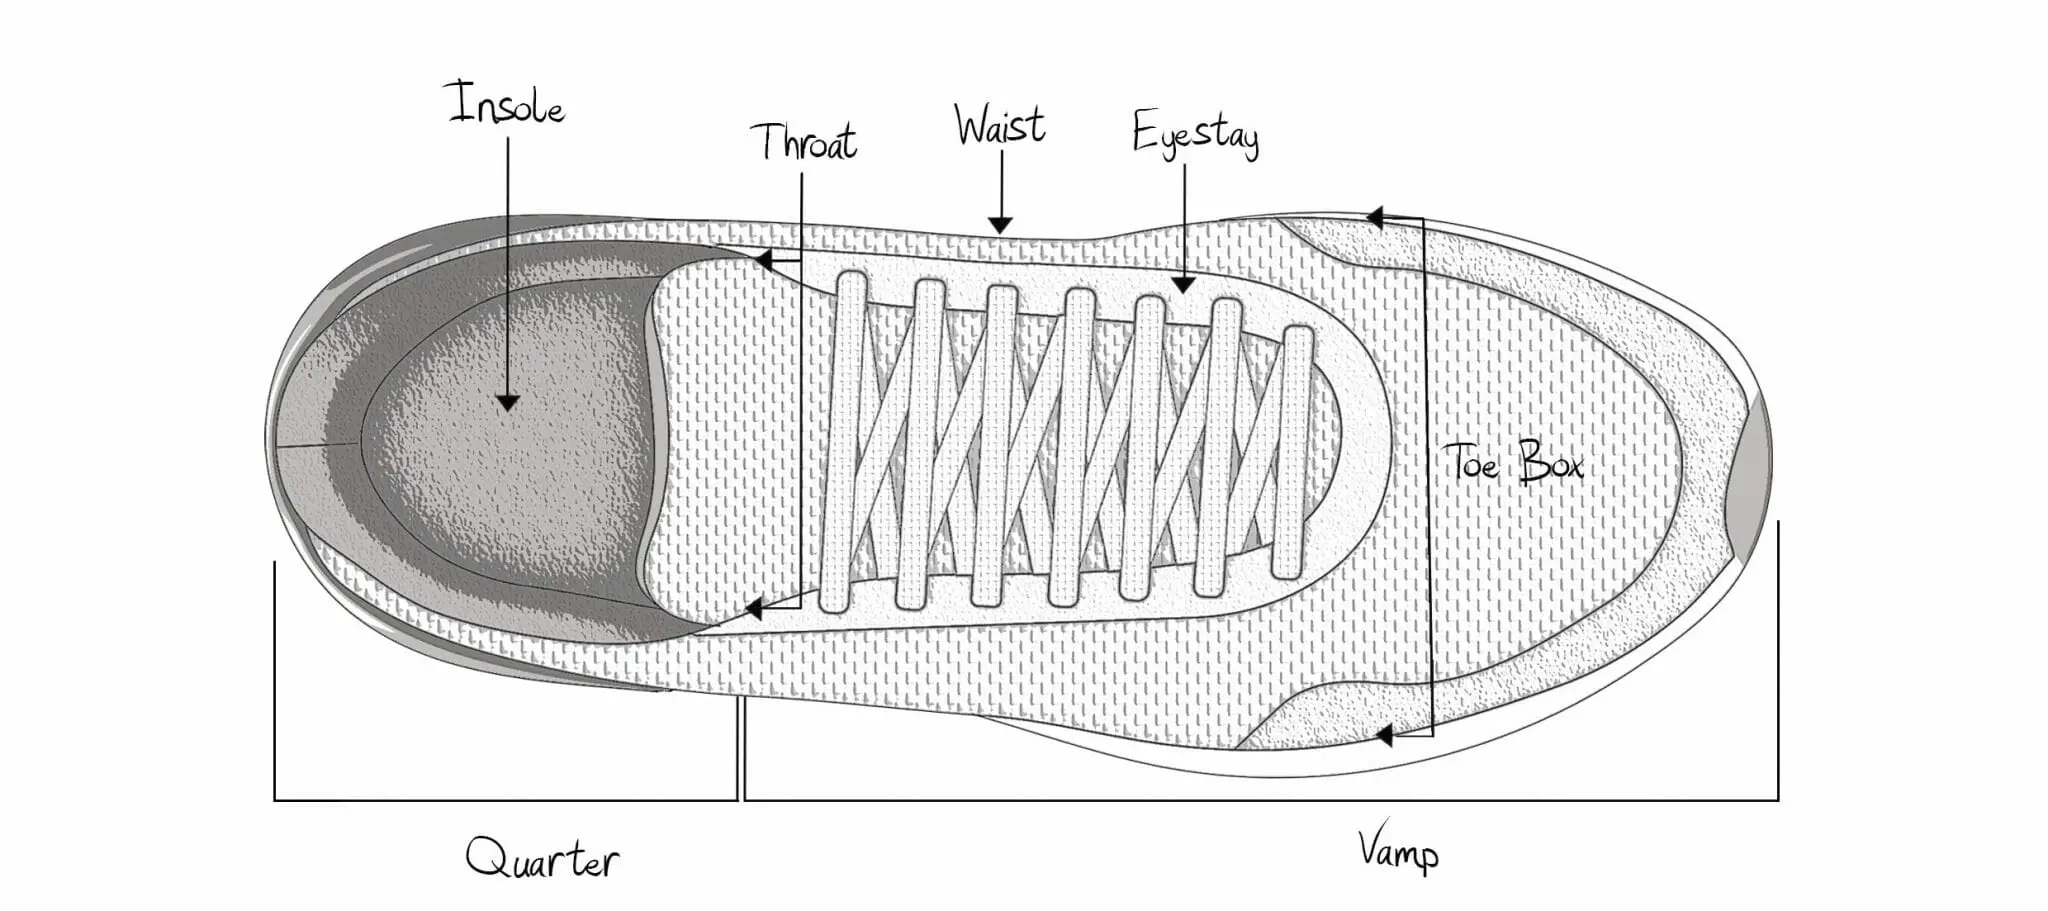 Overhead diagram of shoe anatomy with vamp and quarter